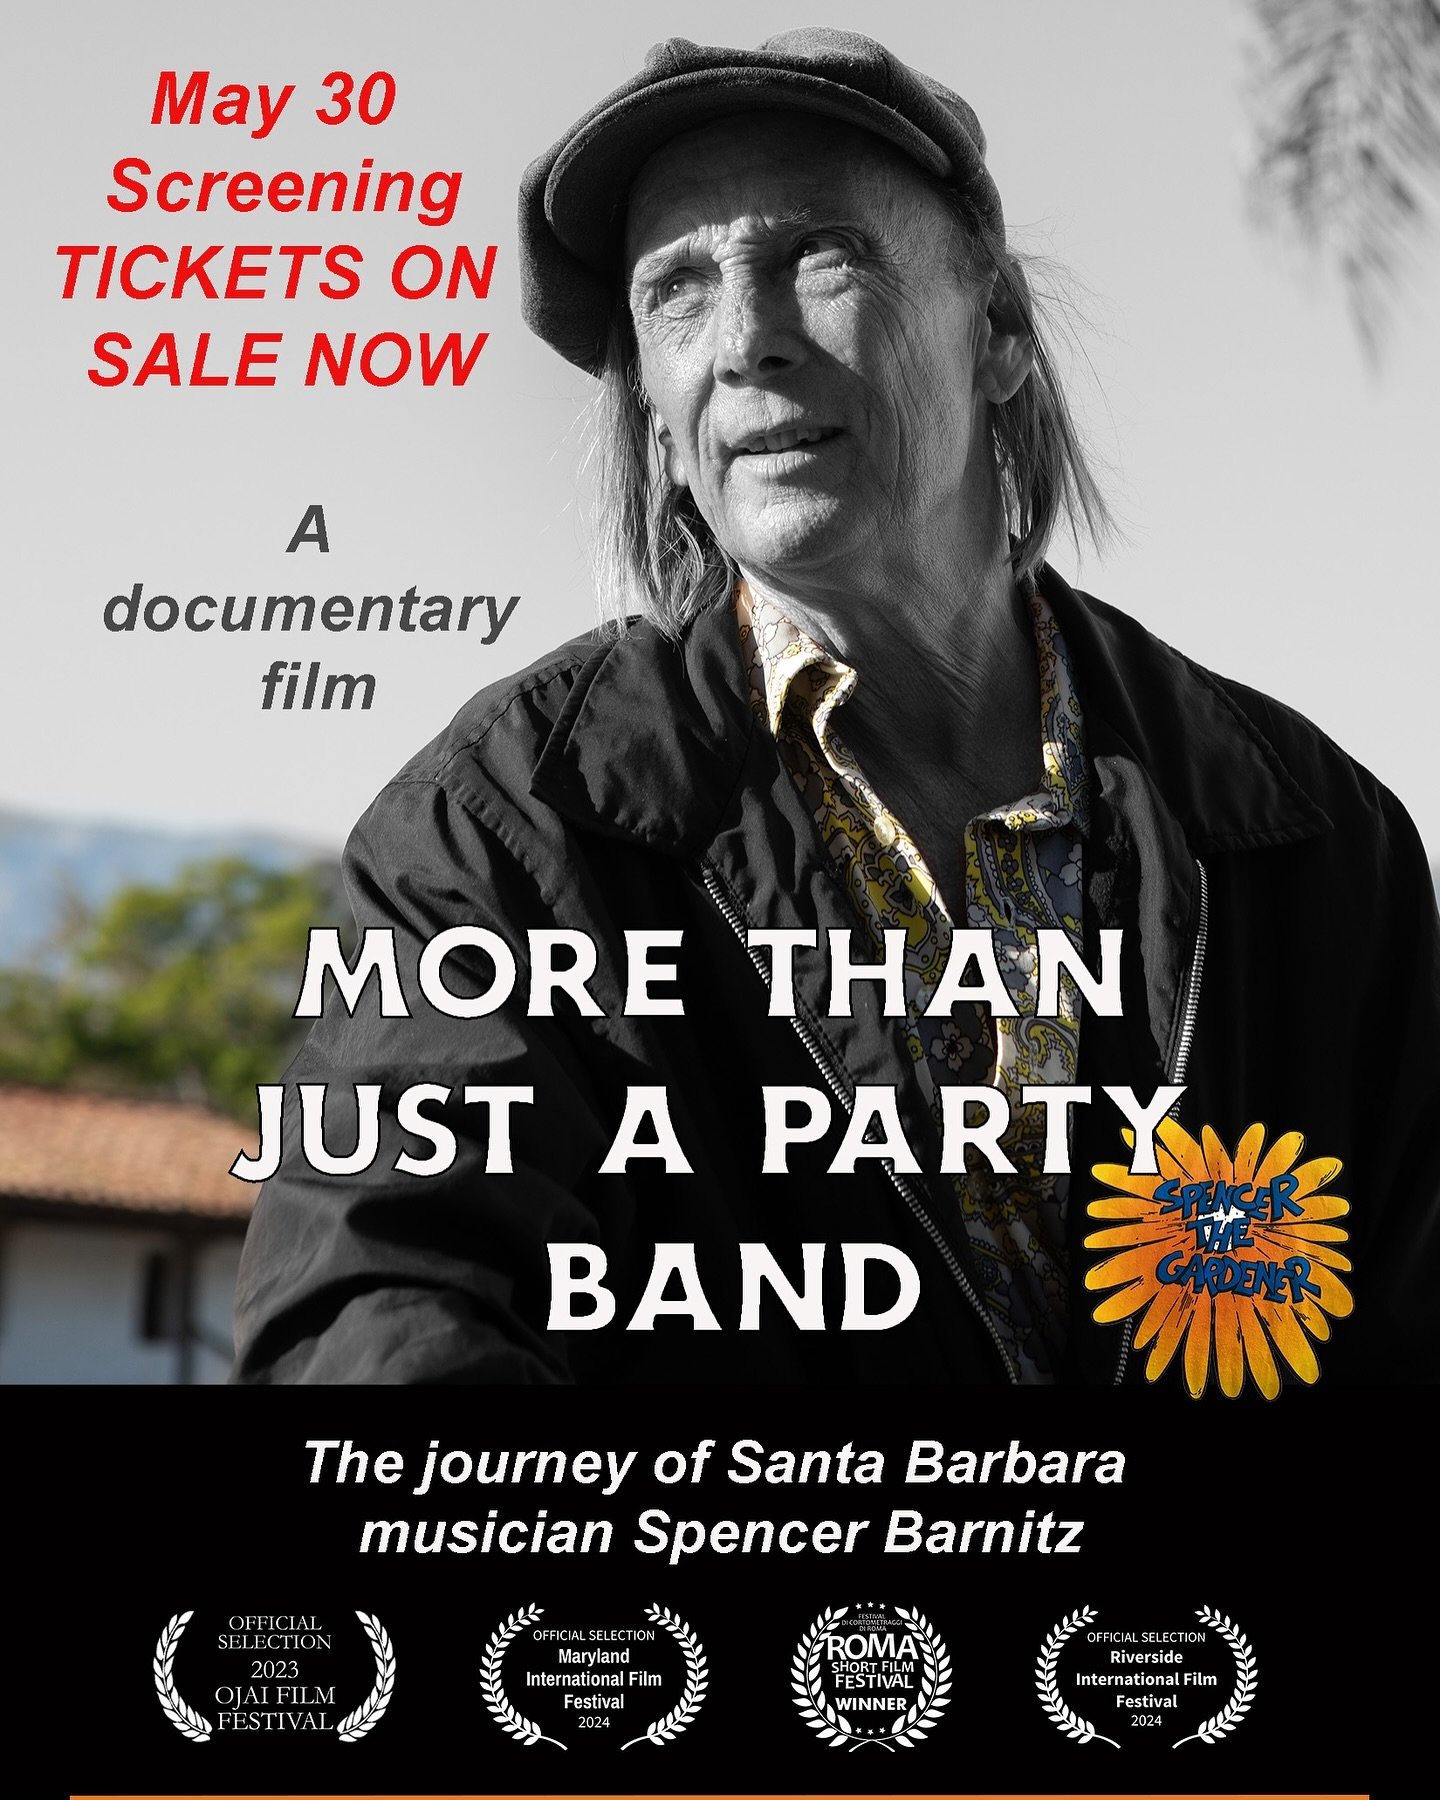 Back by popular demand!  Our documentary film More Than Just A Party Band! &nbsp;May 30, 7:30pm.&nbsp; See bio to BUY TICKETS NOW.
&nbsp;
If you&rsquo;re reading this on Facebook, buy tickets here:
https://www.eventbrite.com/e/more-than-just-a-party-